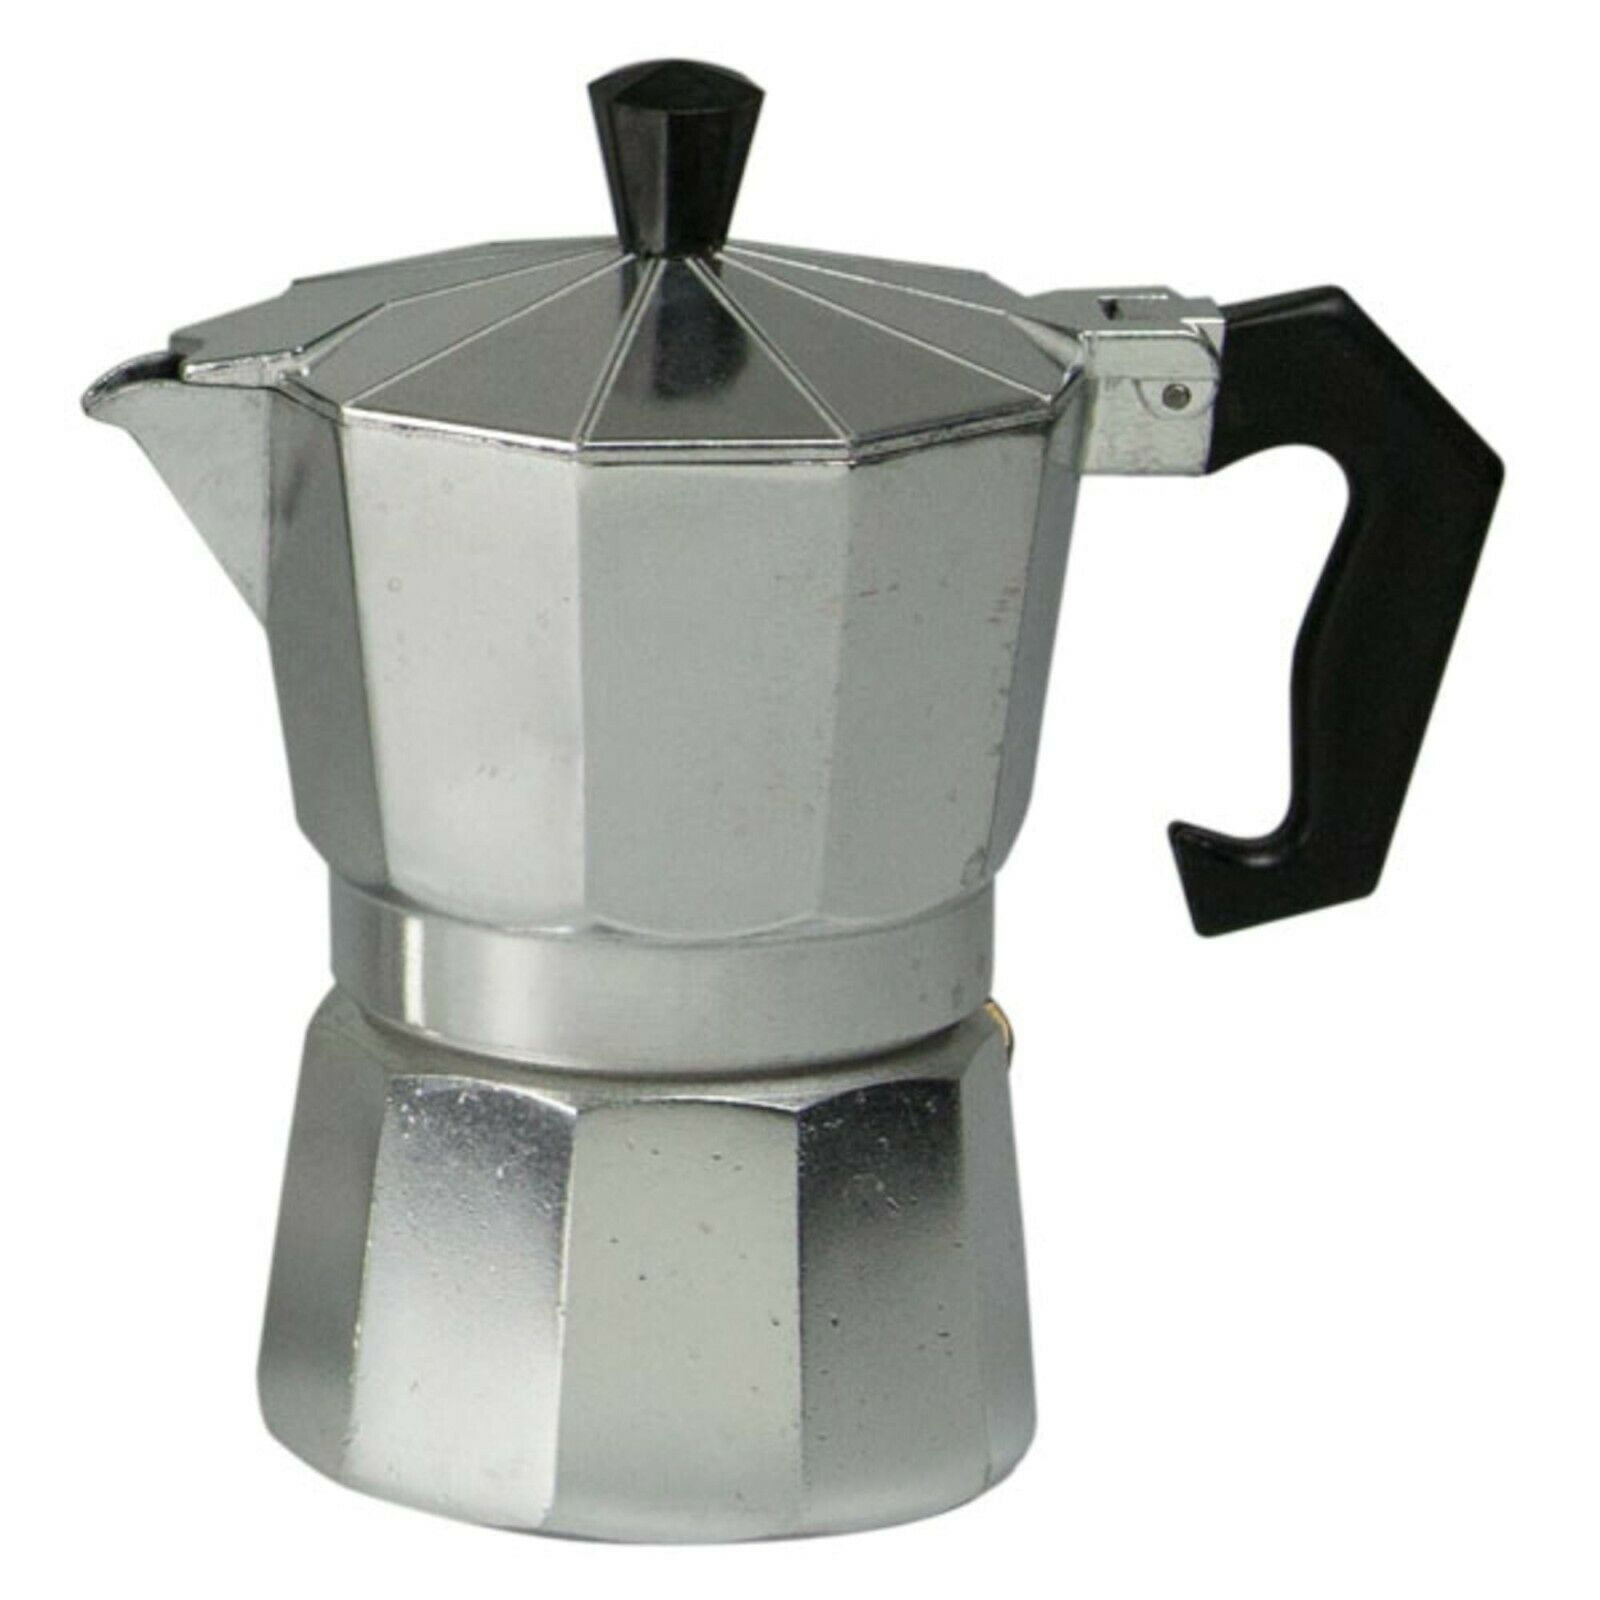 Is it safe to make coffee in an aluminum coffee maker?